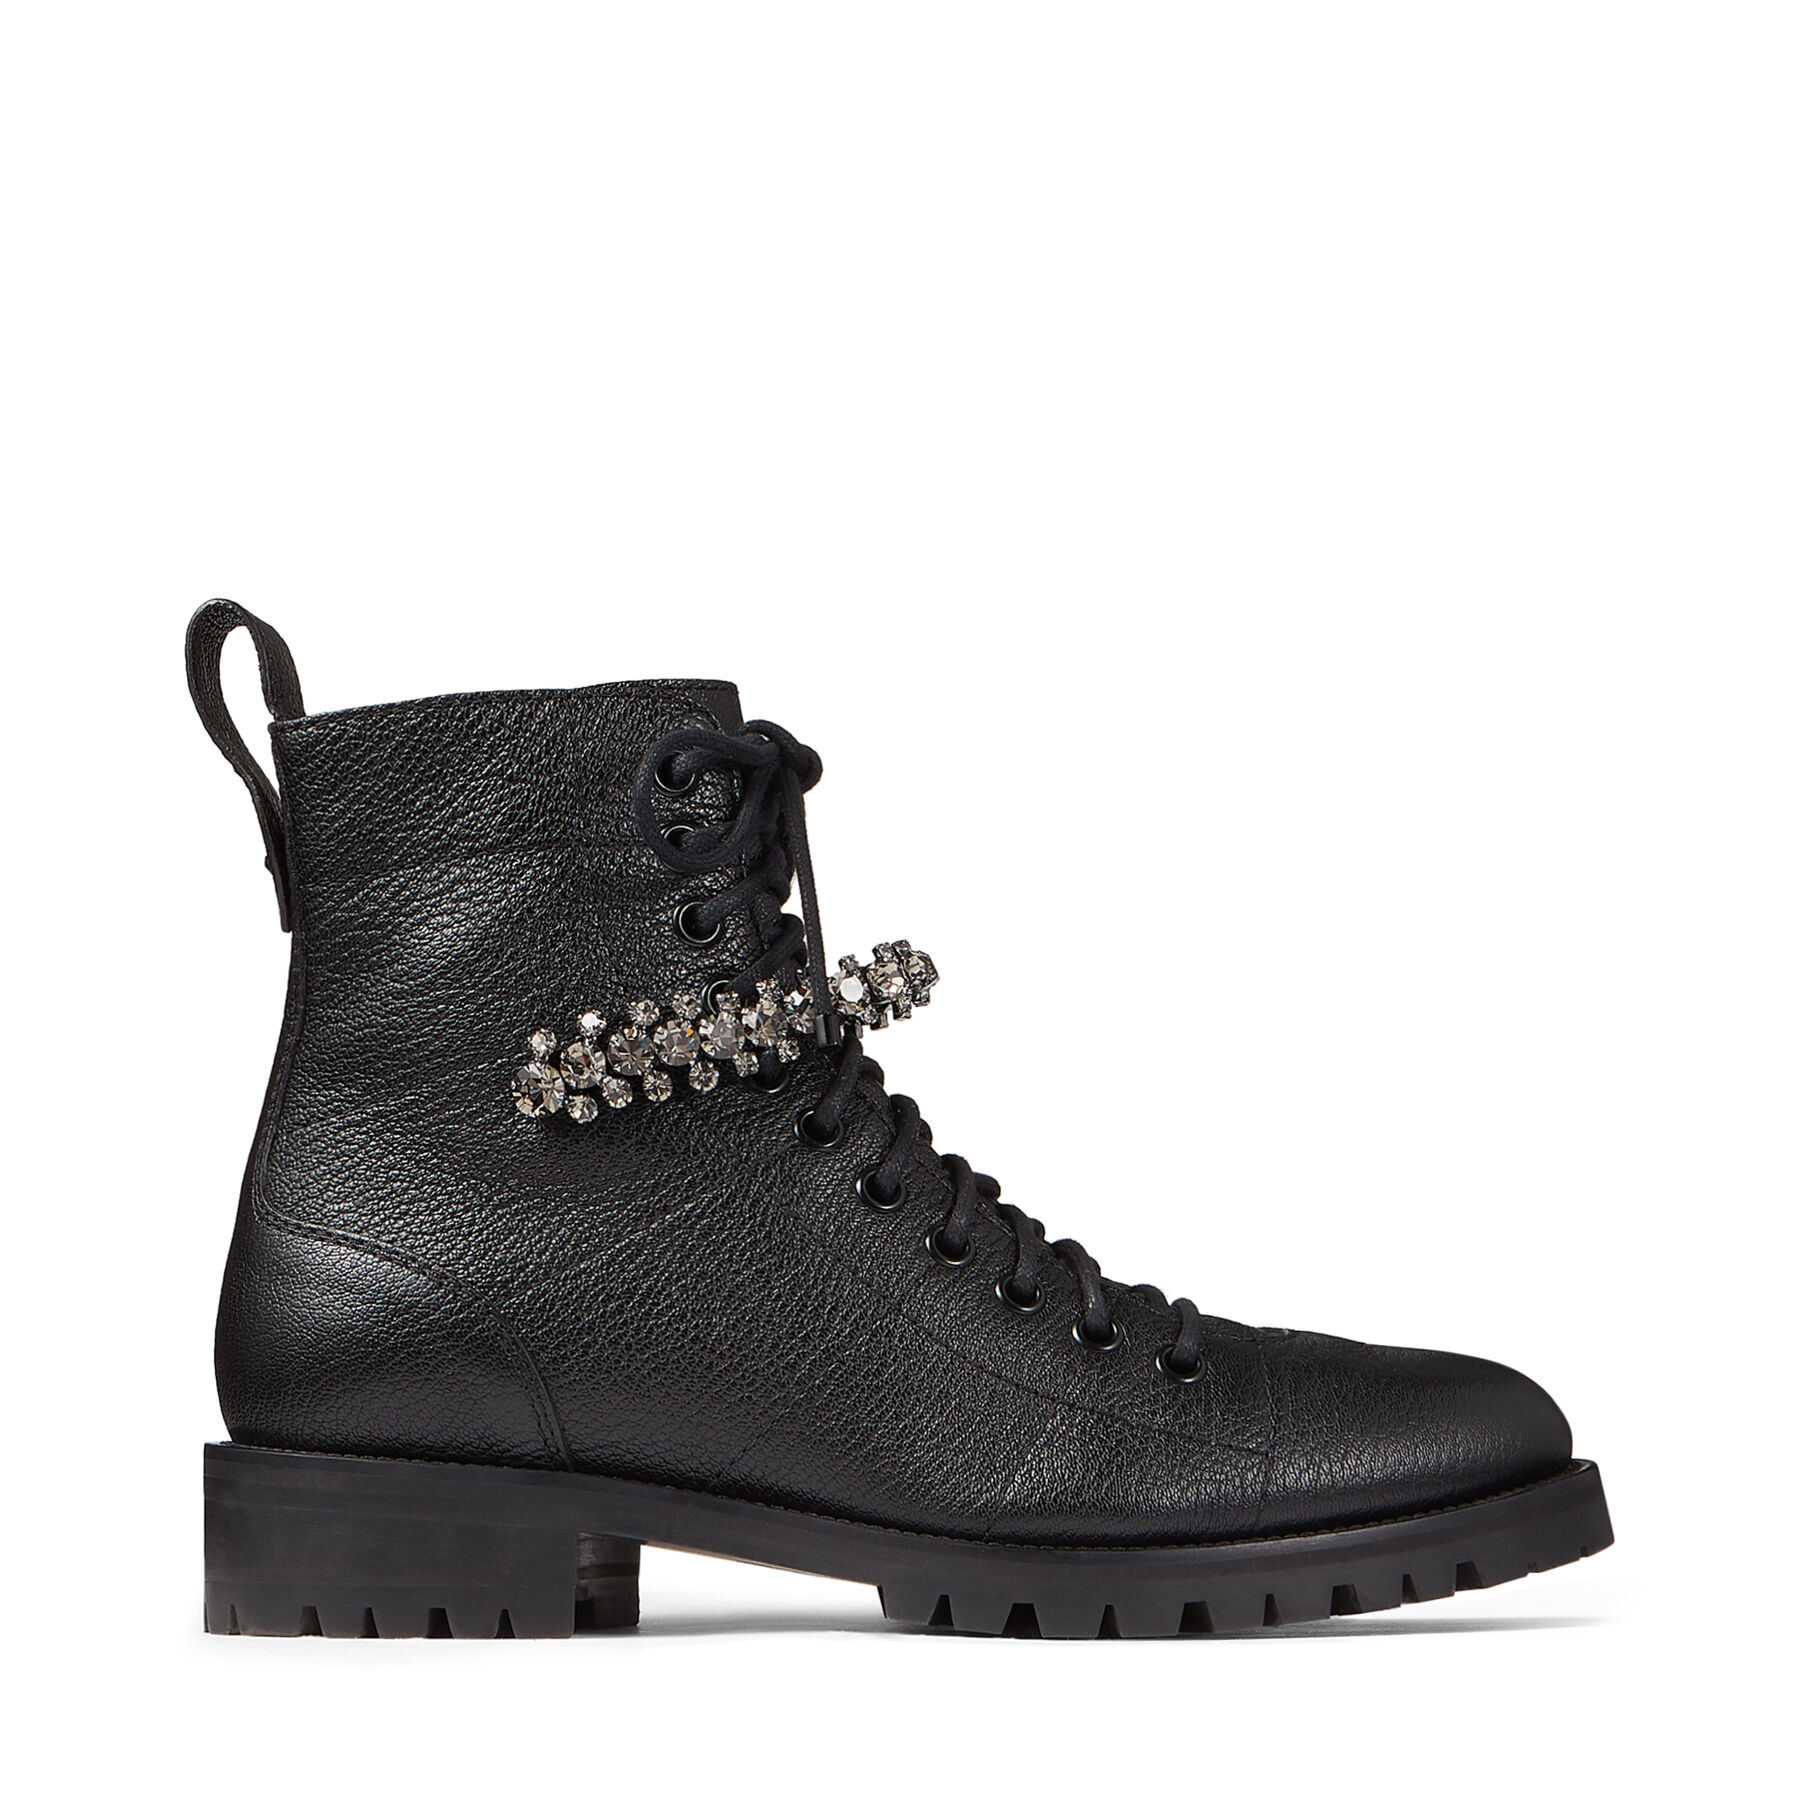 Black Grainy Leather Combat Boots with 